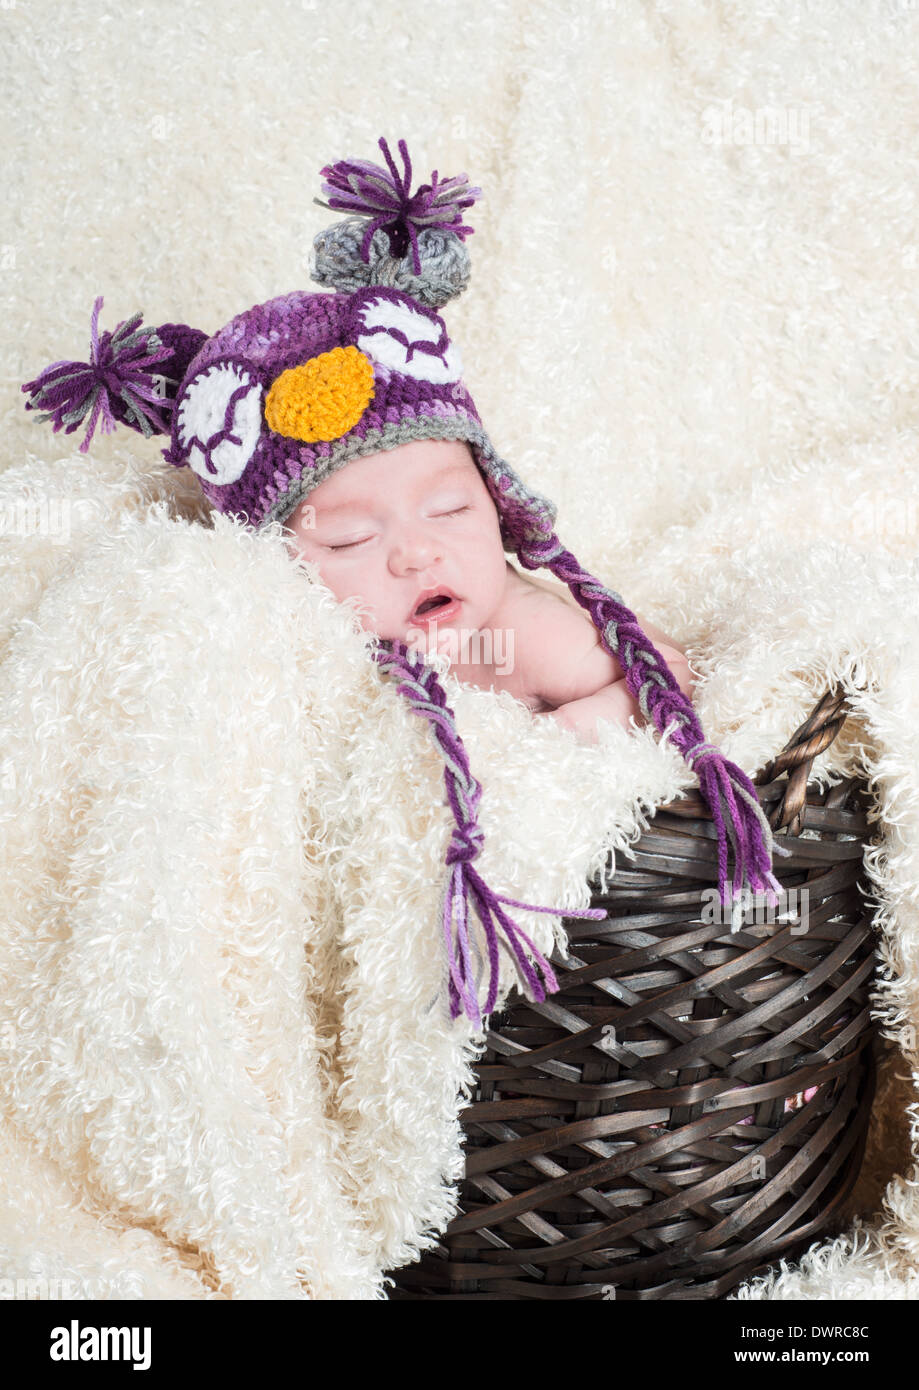 Sleeping baby in a basket with a soft blanket wearing a crocheted owl hat Stock Photo